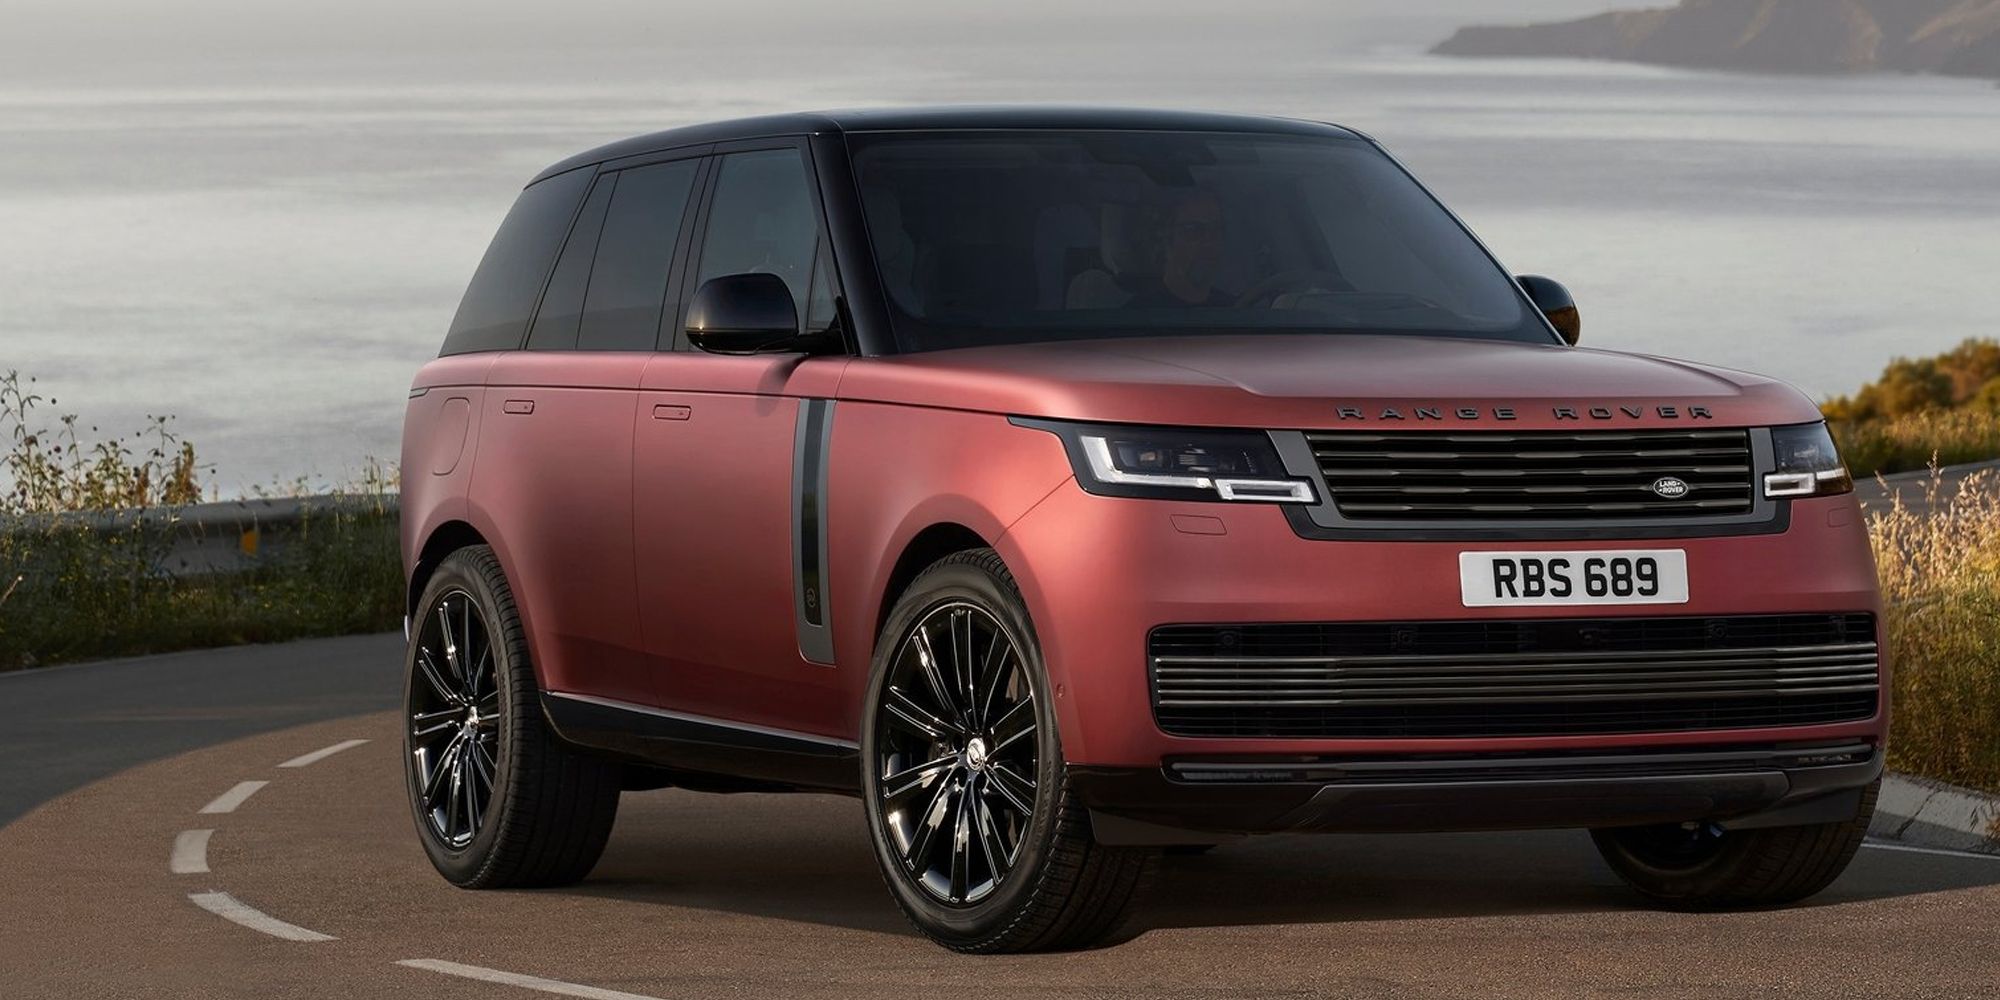 The front of a matte red Range Rover